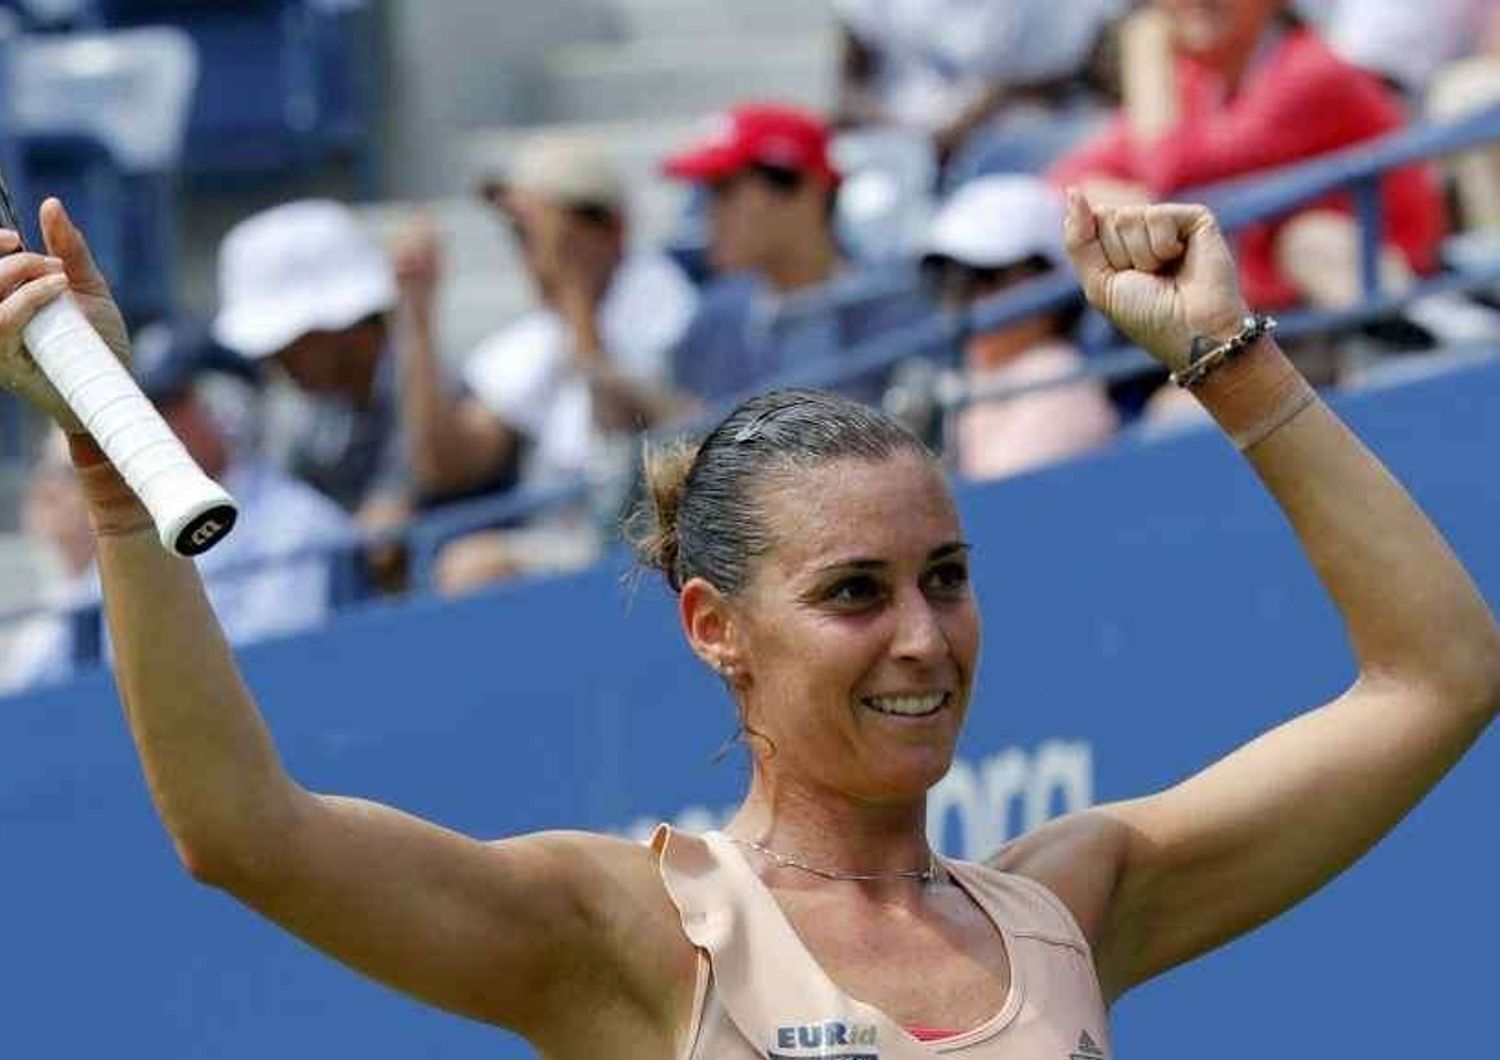 Tennis: Hingis and Pennetta win first doubles title